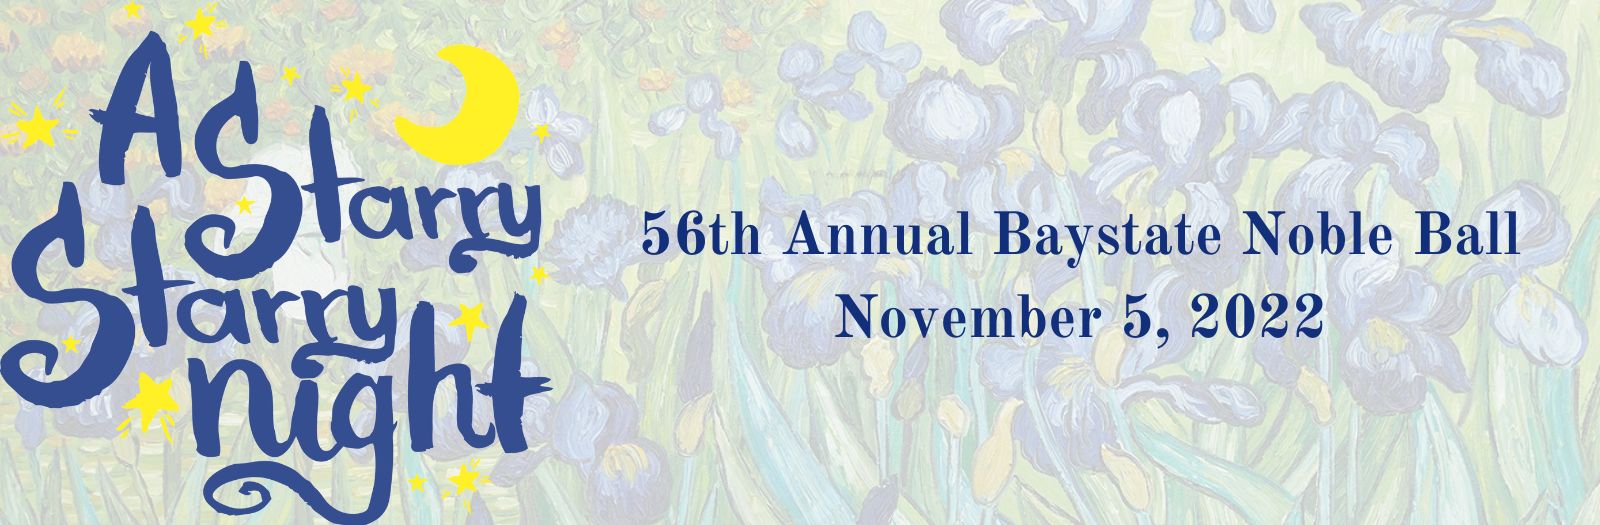 56th Annual Baystate Noble Ball